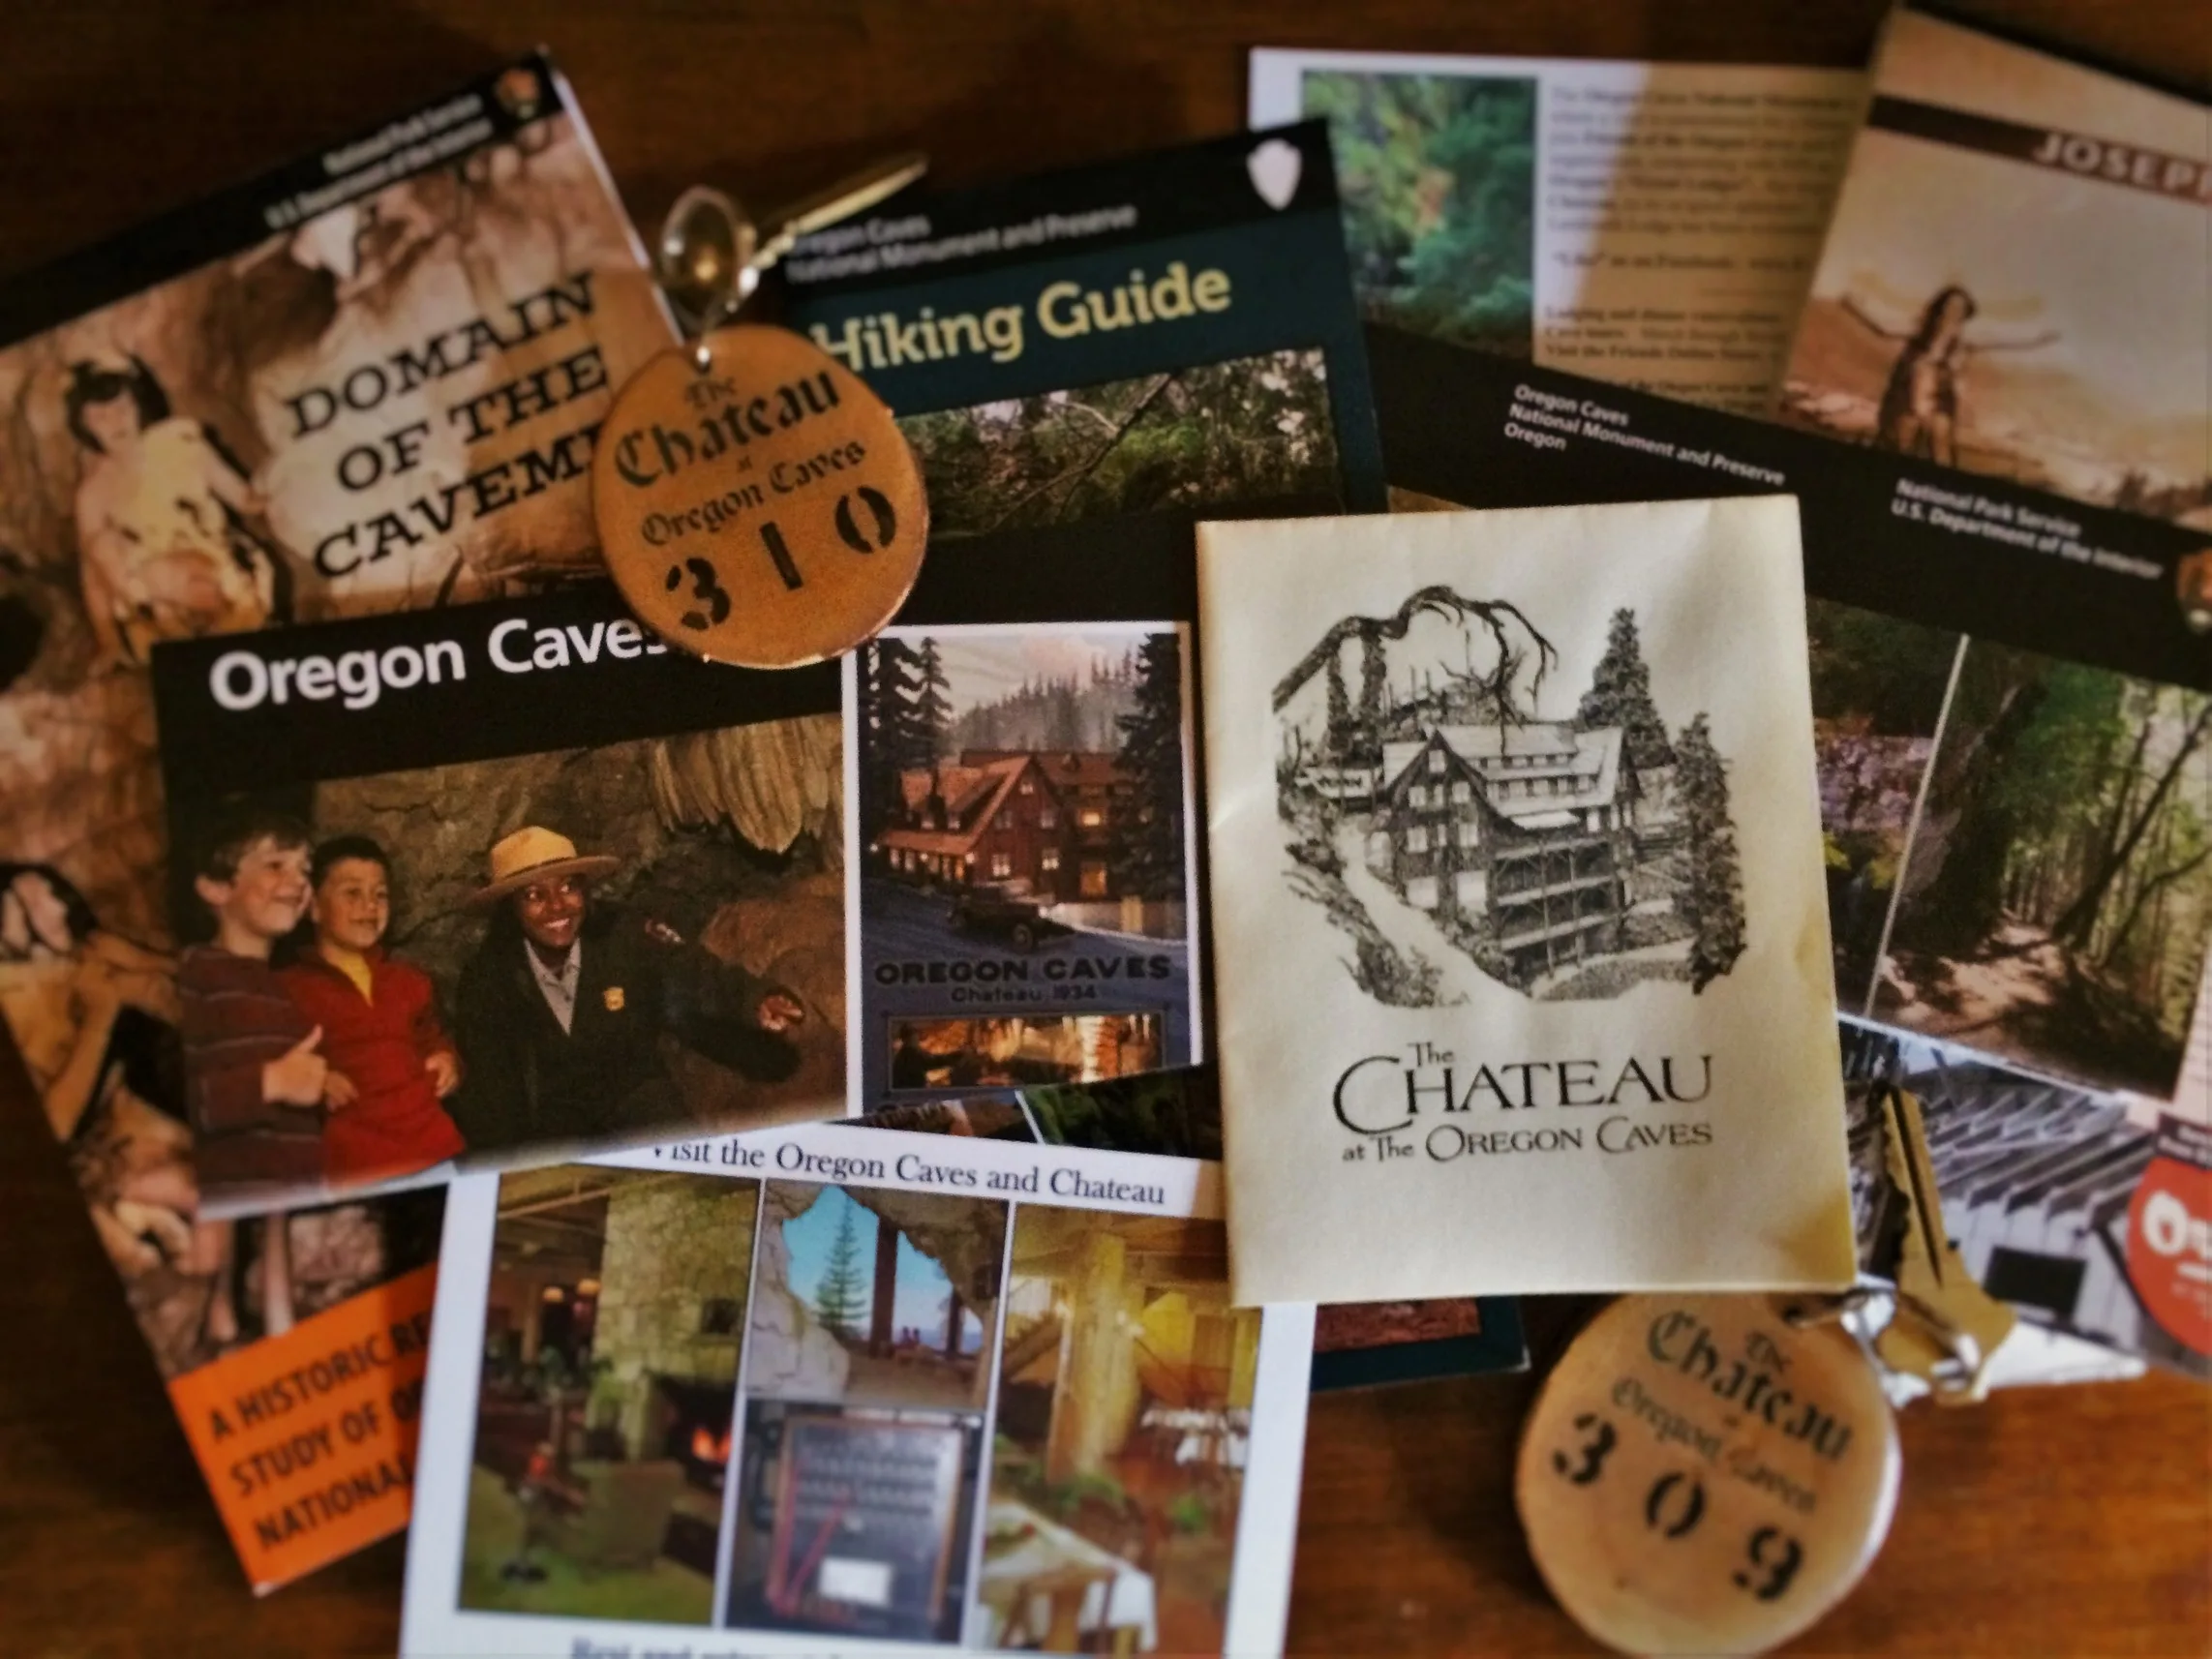 Oregon Caves Chateau collateral